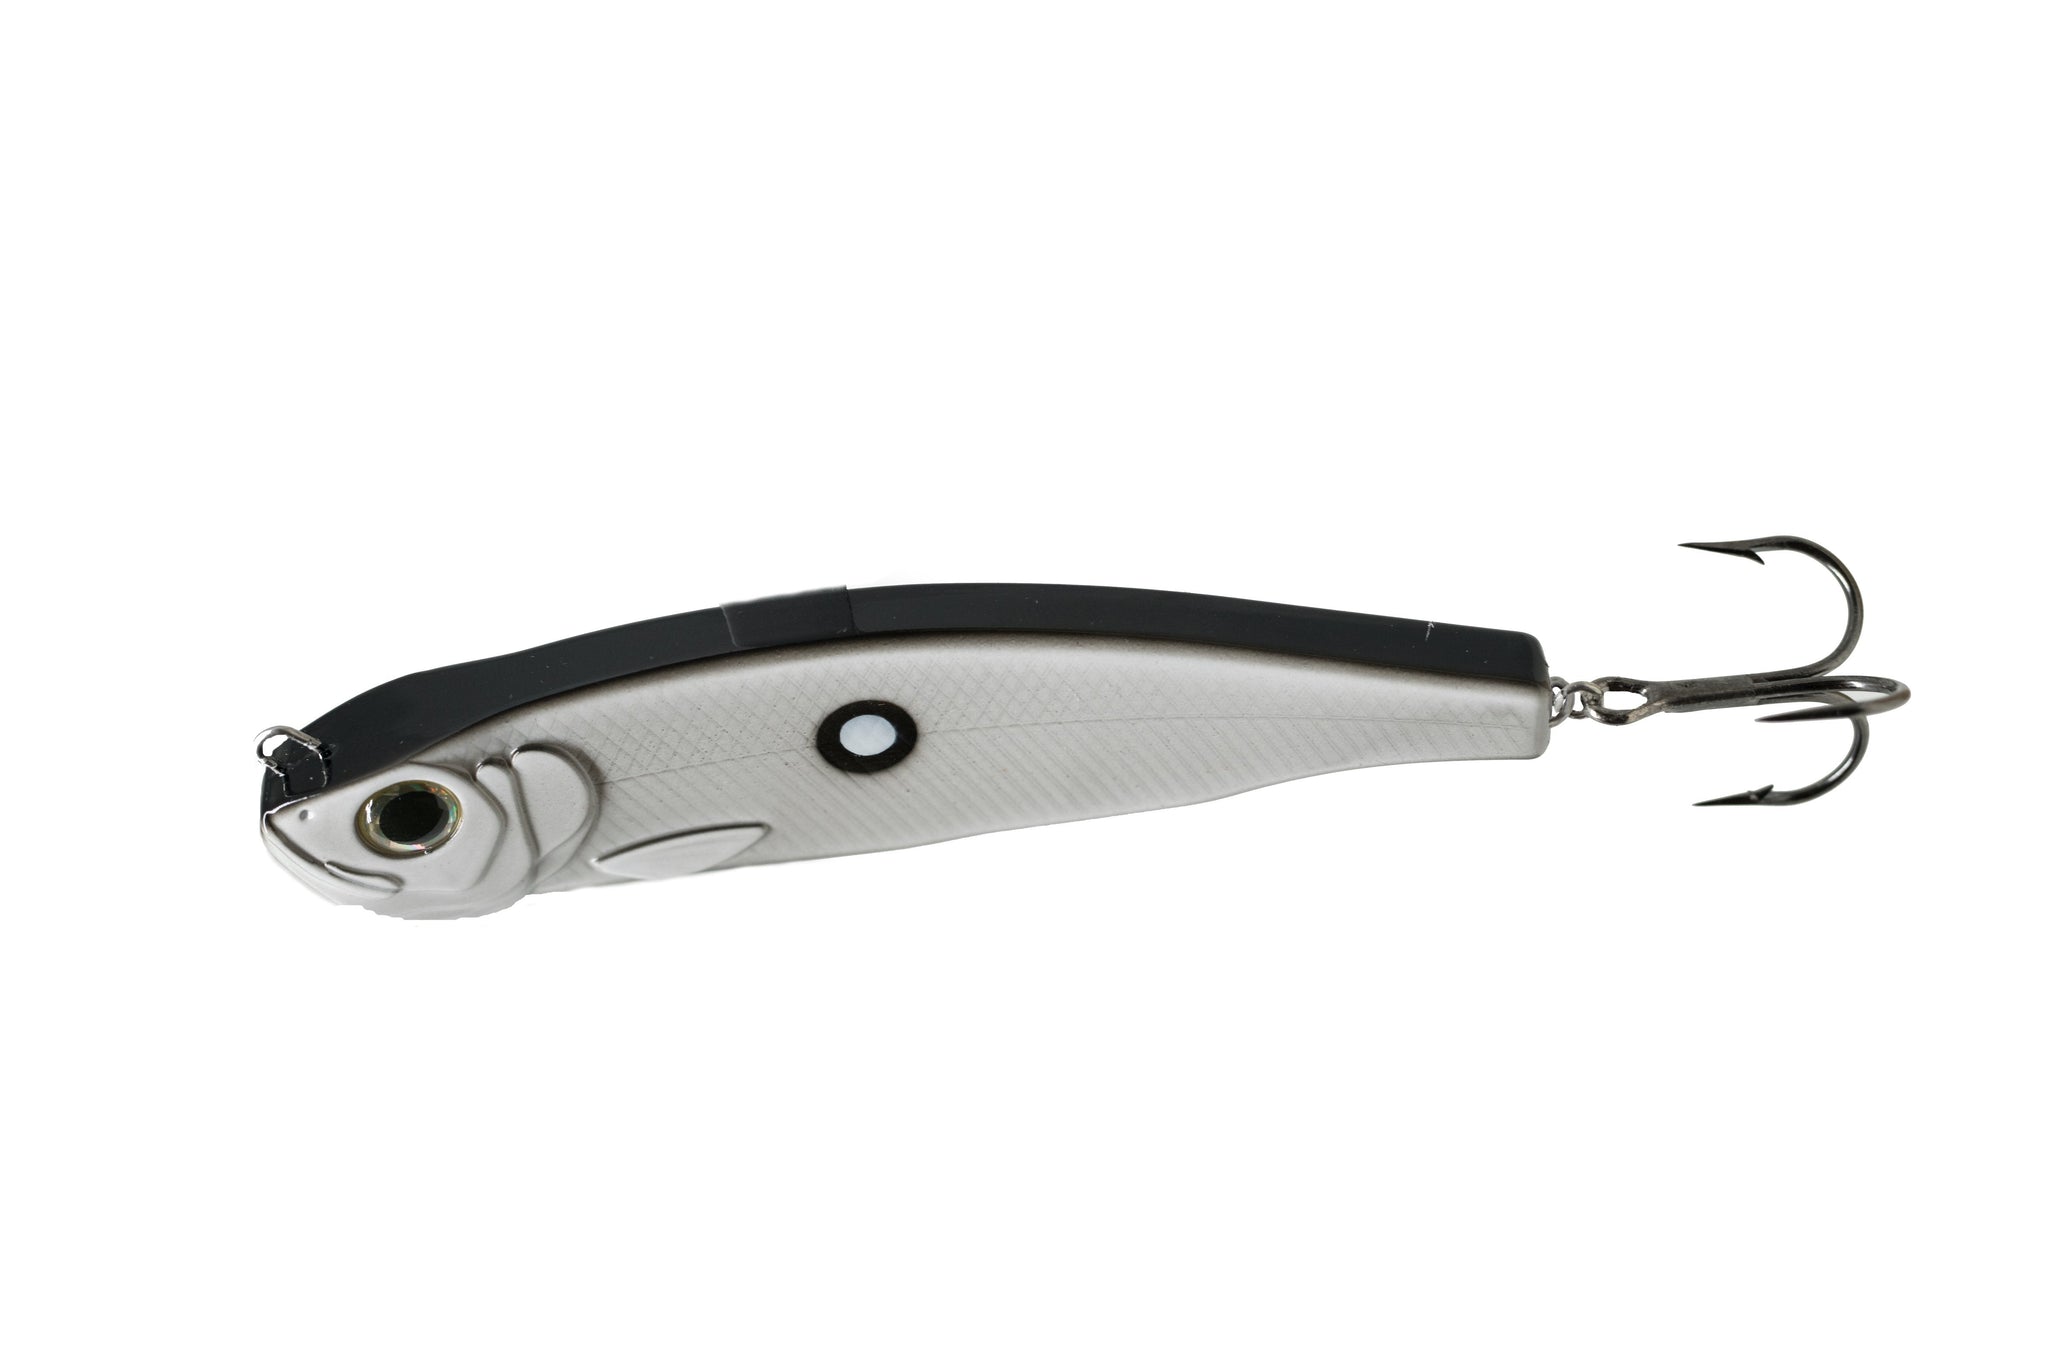 Freedom Herring Cutbait – All Things Outdoors